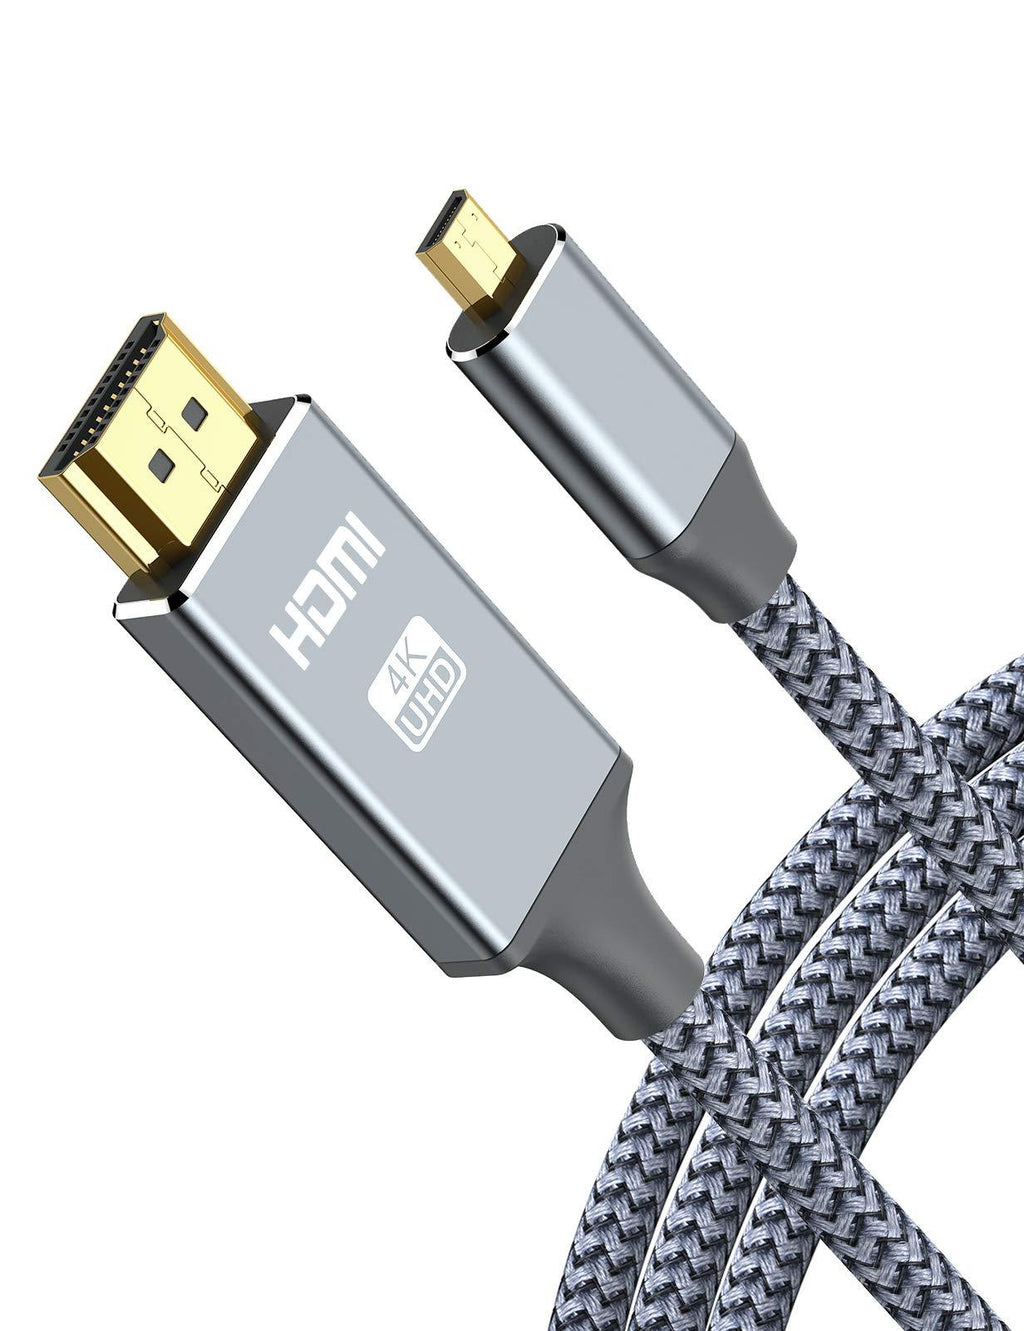 4K Micro HDMI to HDMI Cable Adapter 10FT, Oldboytech Micro HDMI Cable Nylon Braid (Male to Male) 4K@30HZ/3D Grey Compatible with Hero 8/7/6/5, Raspberry Pi 4, A6000, A6300, Nikon Camera